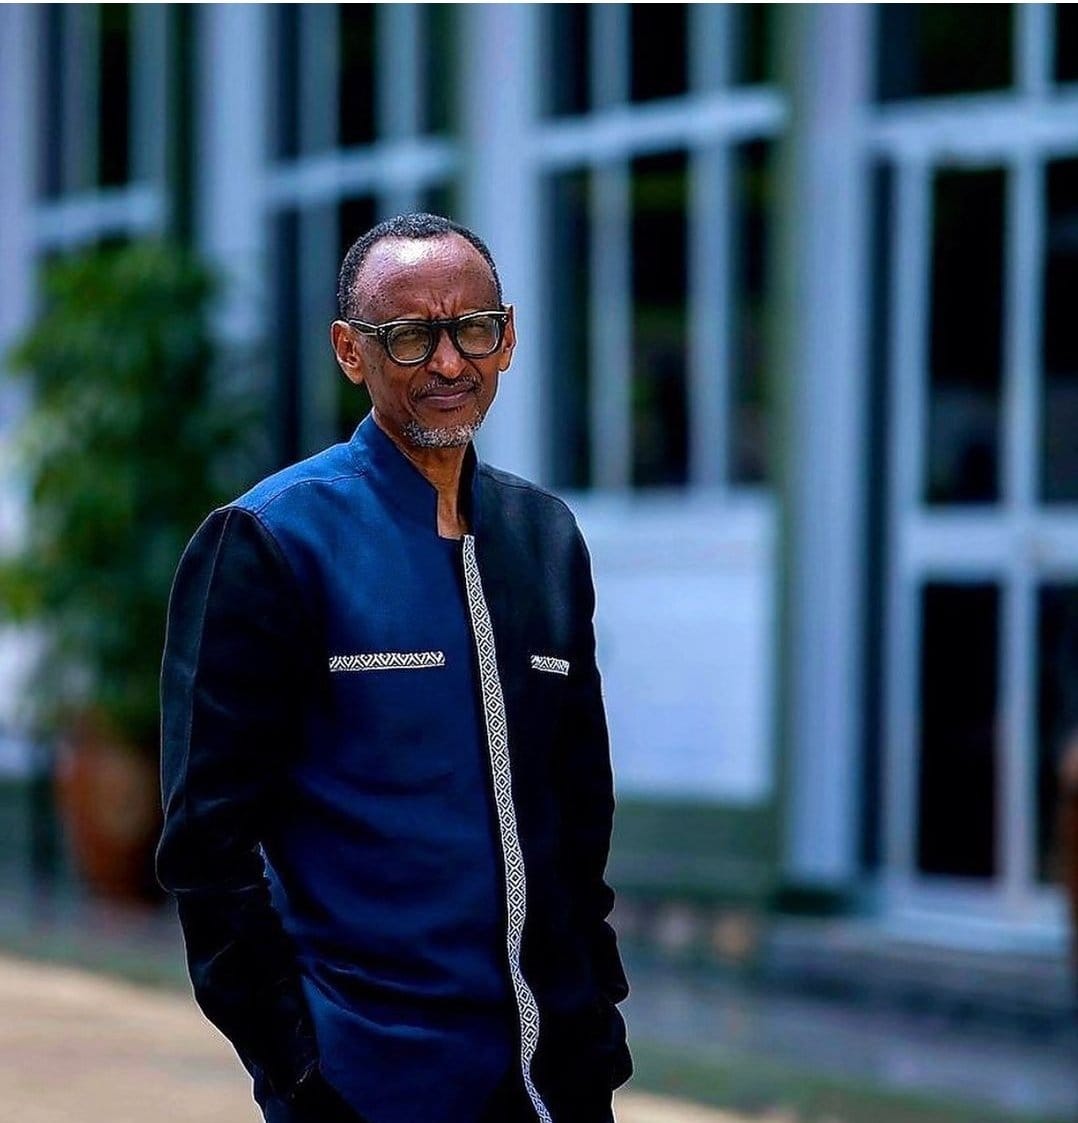 Grand TERRORIST posing for a photo like a horny teenager on the streets of Pattaya. The owner of Rwanda  is still in London, he has always enjoyed being outside his enclave. 

A dictator, draped in indulgence, whose appetite for luxury is only surpassed by his thirst for blood.